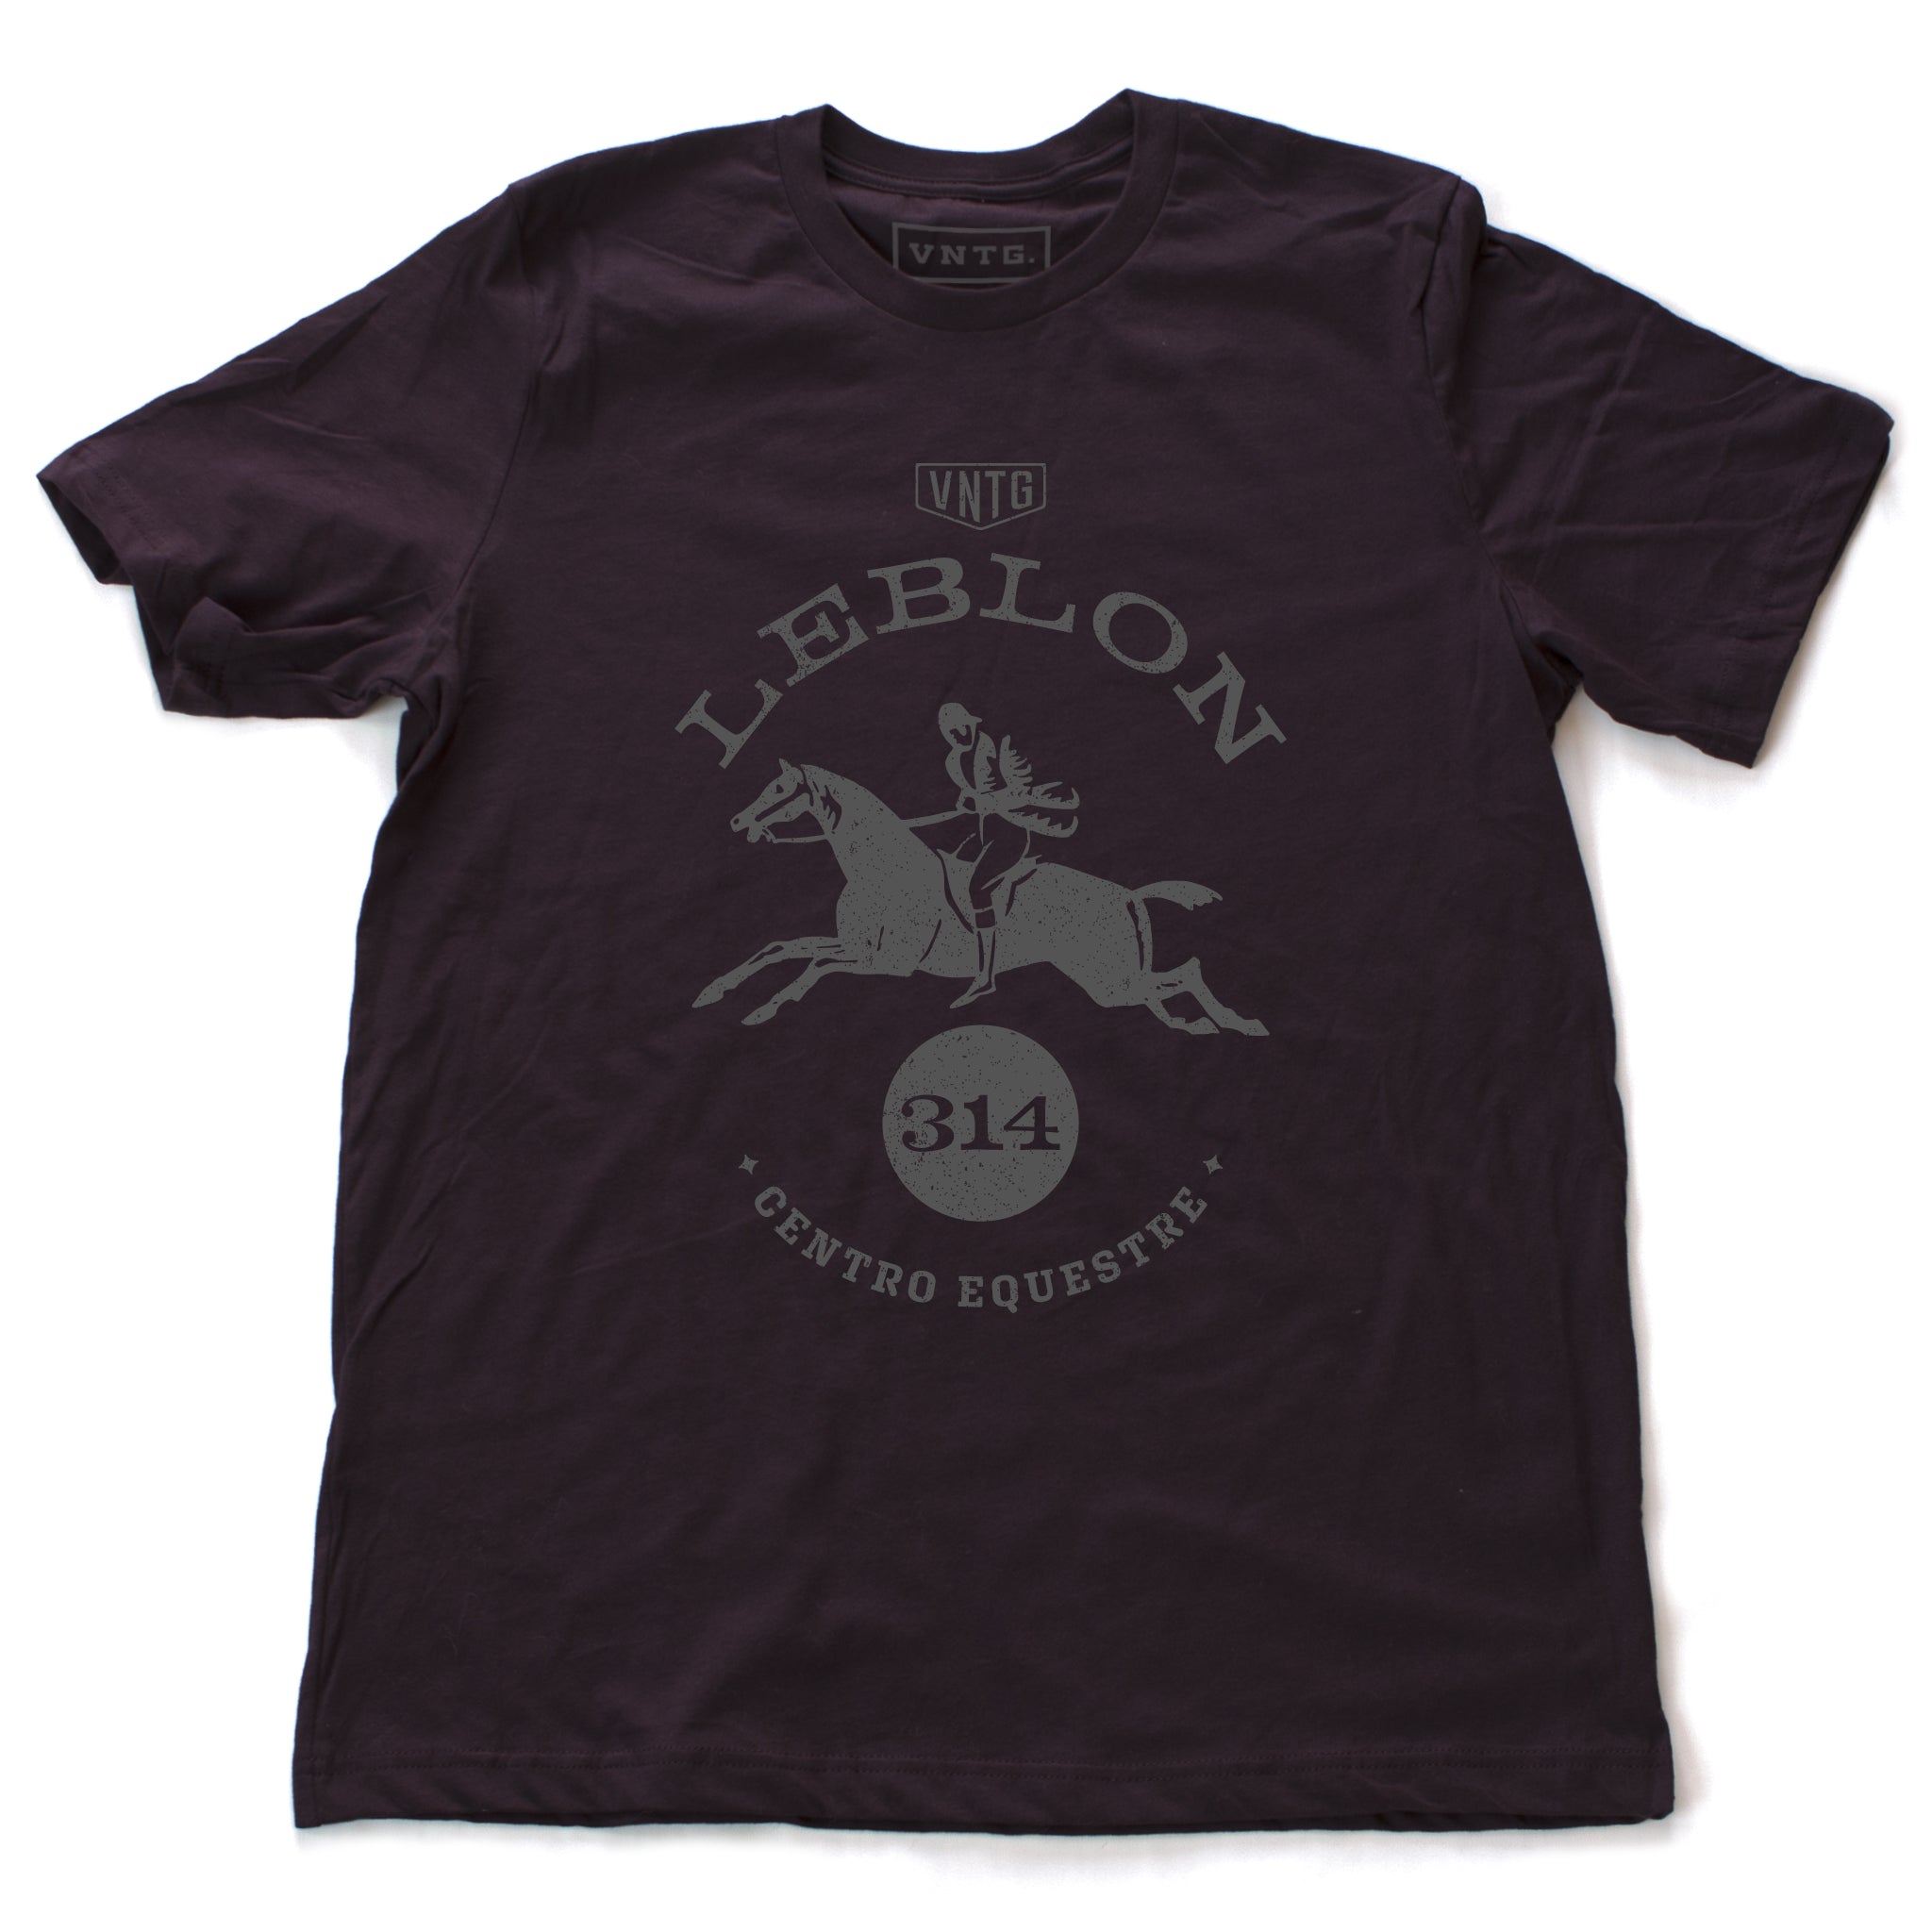 A preppy fashion retro, vintage-inspired t-shirt in Oxblood, featuring a leaping horse in dressage competition, surrounded by the words “Leblon Centro Equestre” (Leblon Equestrian Center) a fictitious horse training and competition facility in Rio de Janeiro, Brazil. By fashion brand VNTG., for wolfsaint.net